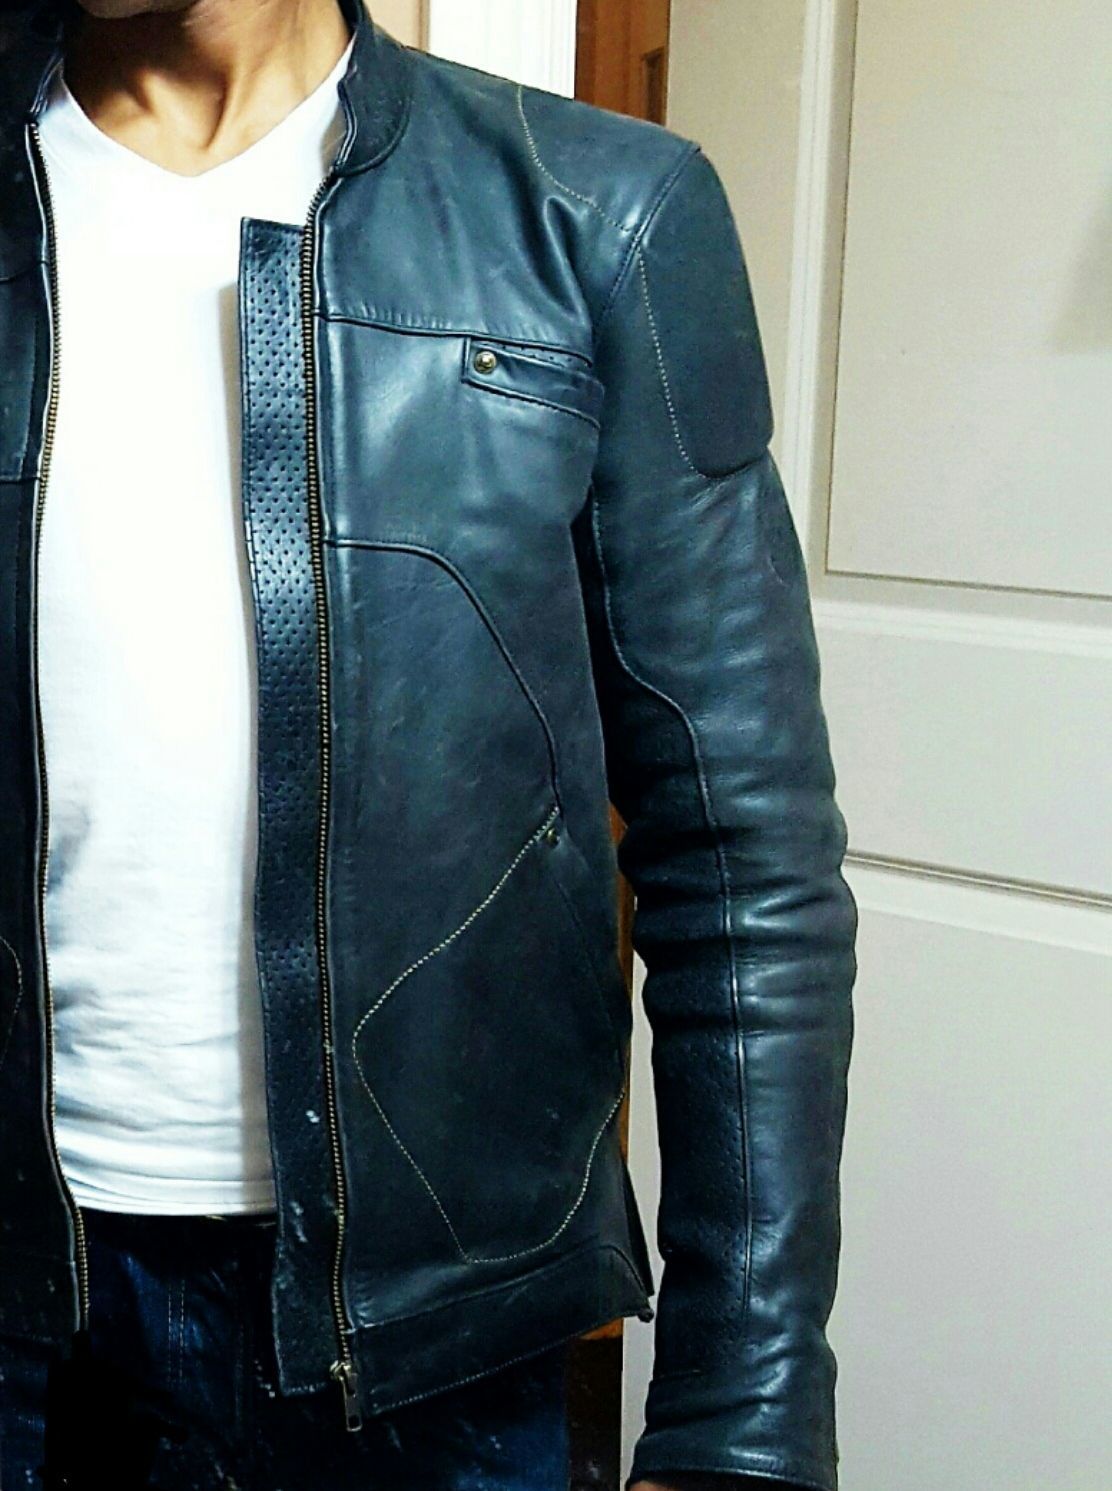 Leather Jackets: Post Pictures of the Best You've Seen/Owned? | Page ...